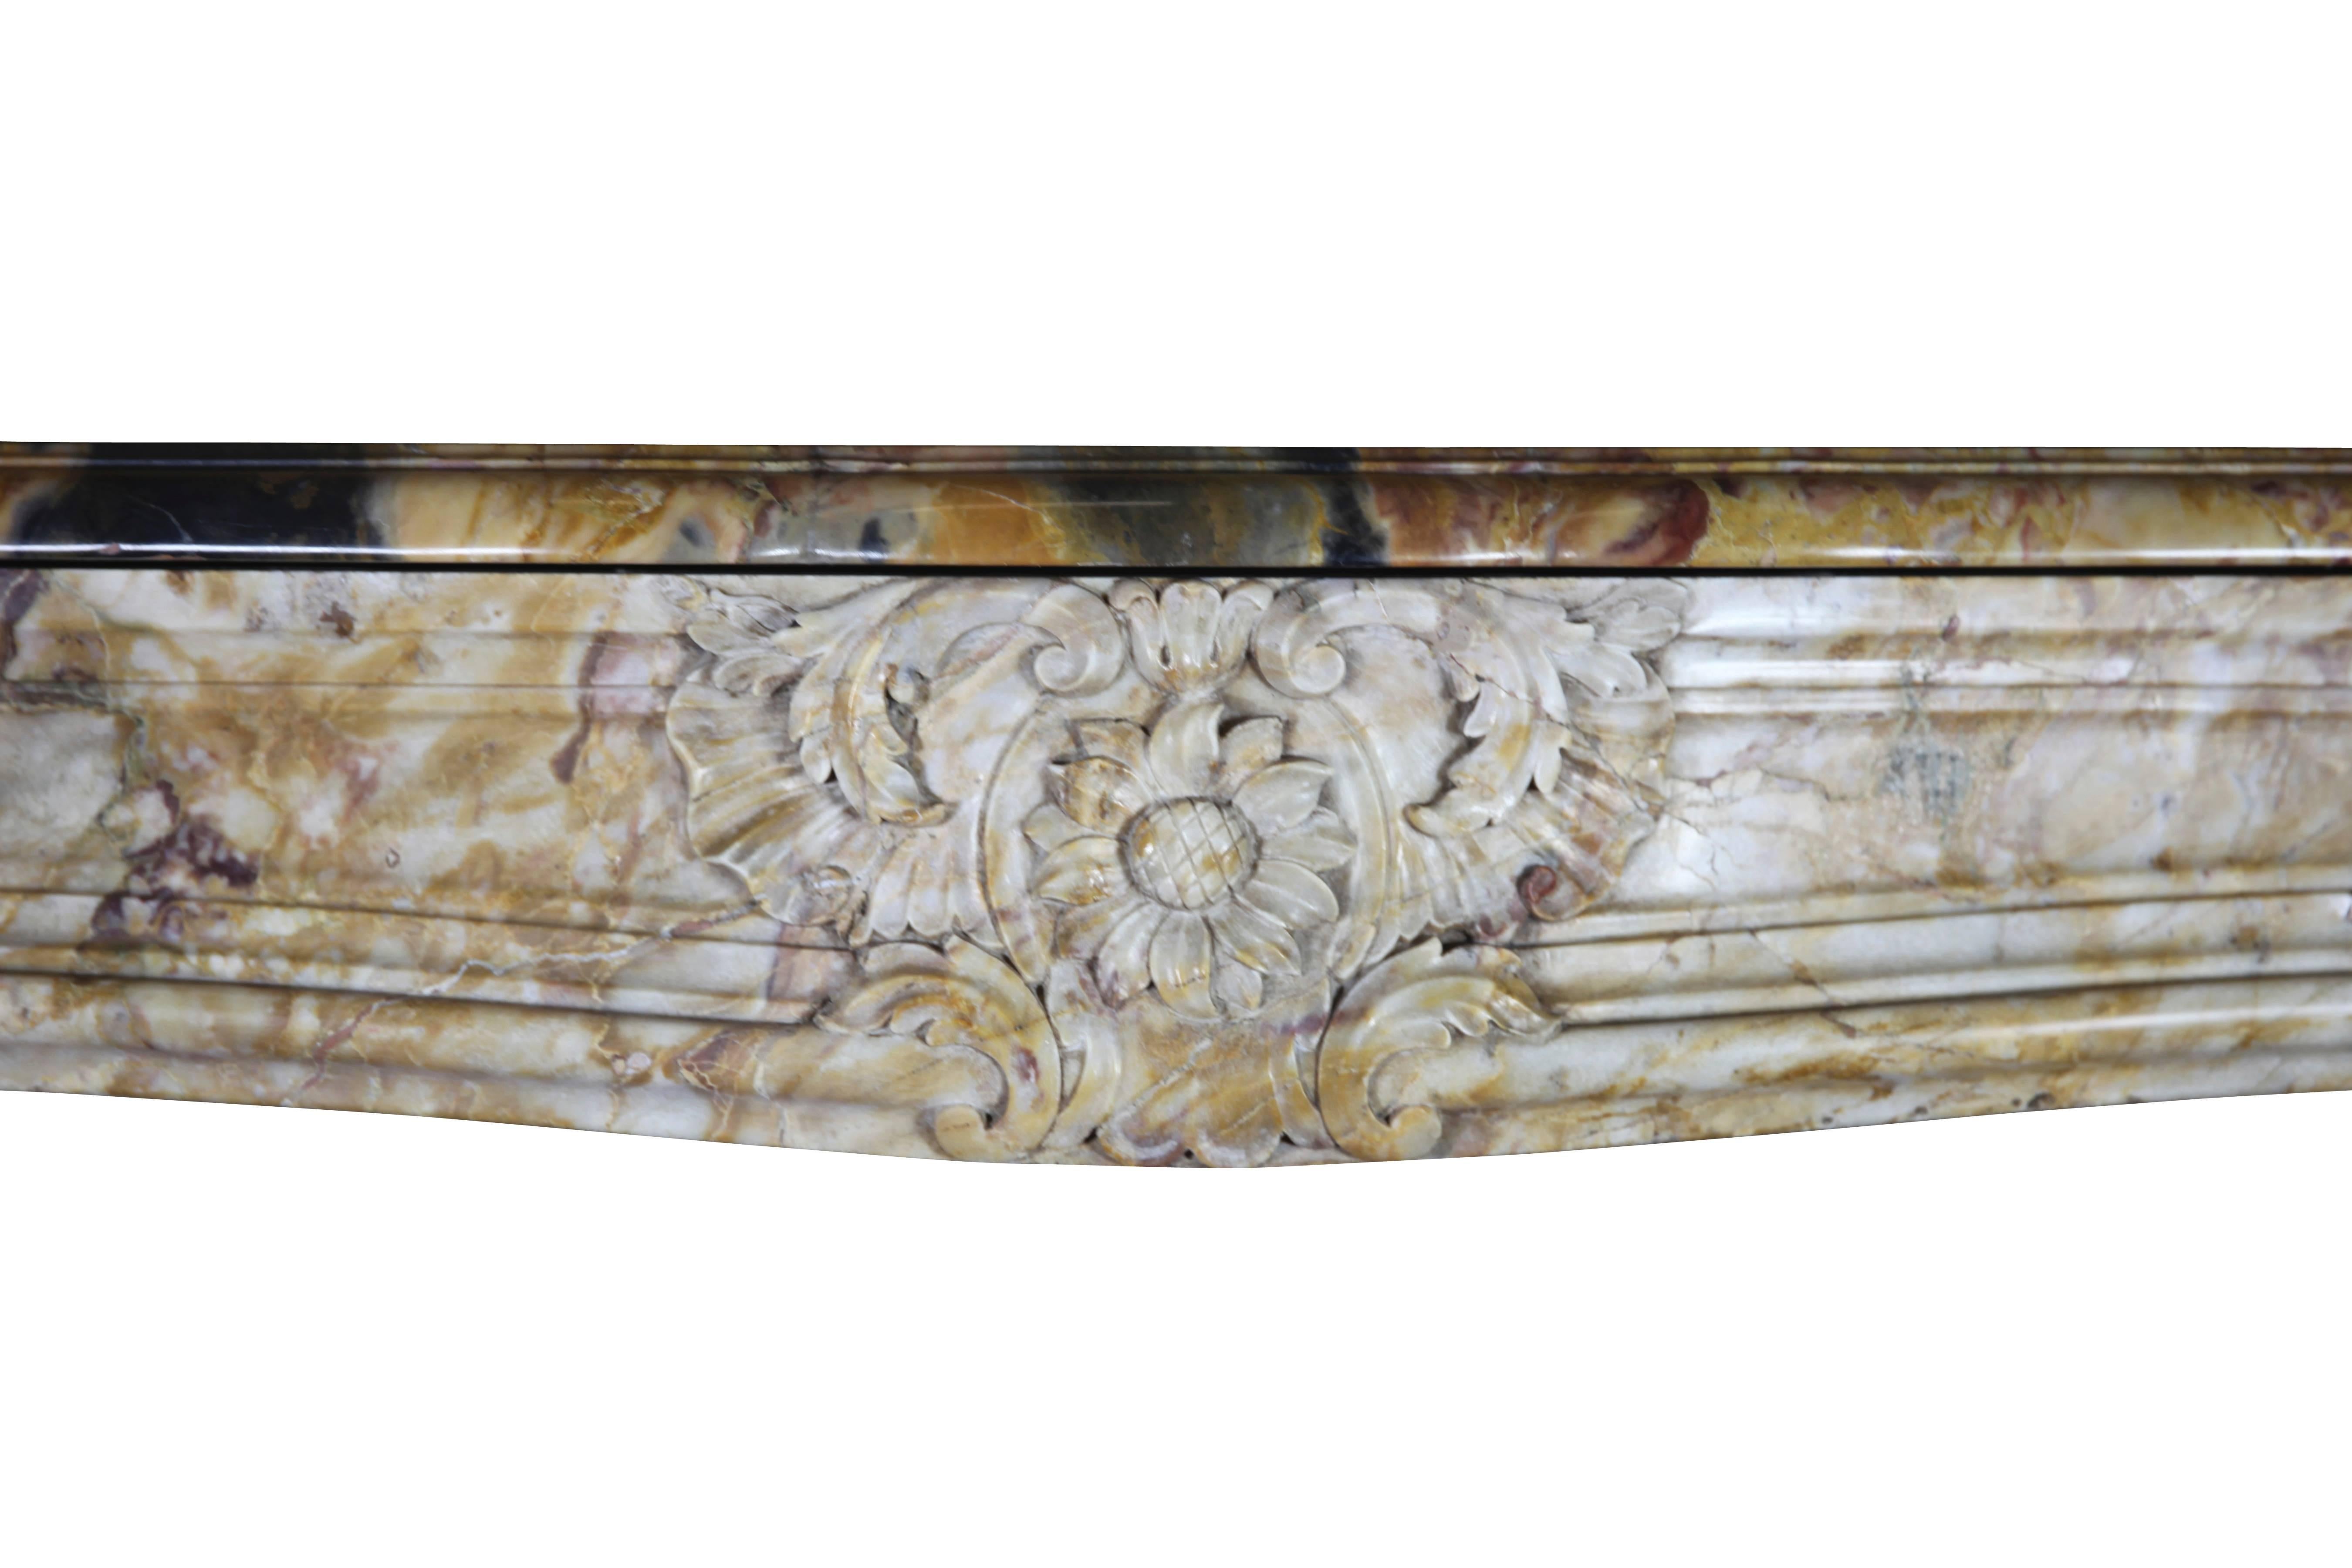 This colorful antique fireplace chimney piece is executed in a Royal French Brêche Vendôme marble. The carving details are fine and of a high quality. It reflects the luxury lifestyle of the interior it was built in. Original 18th century